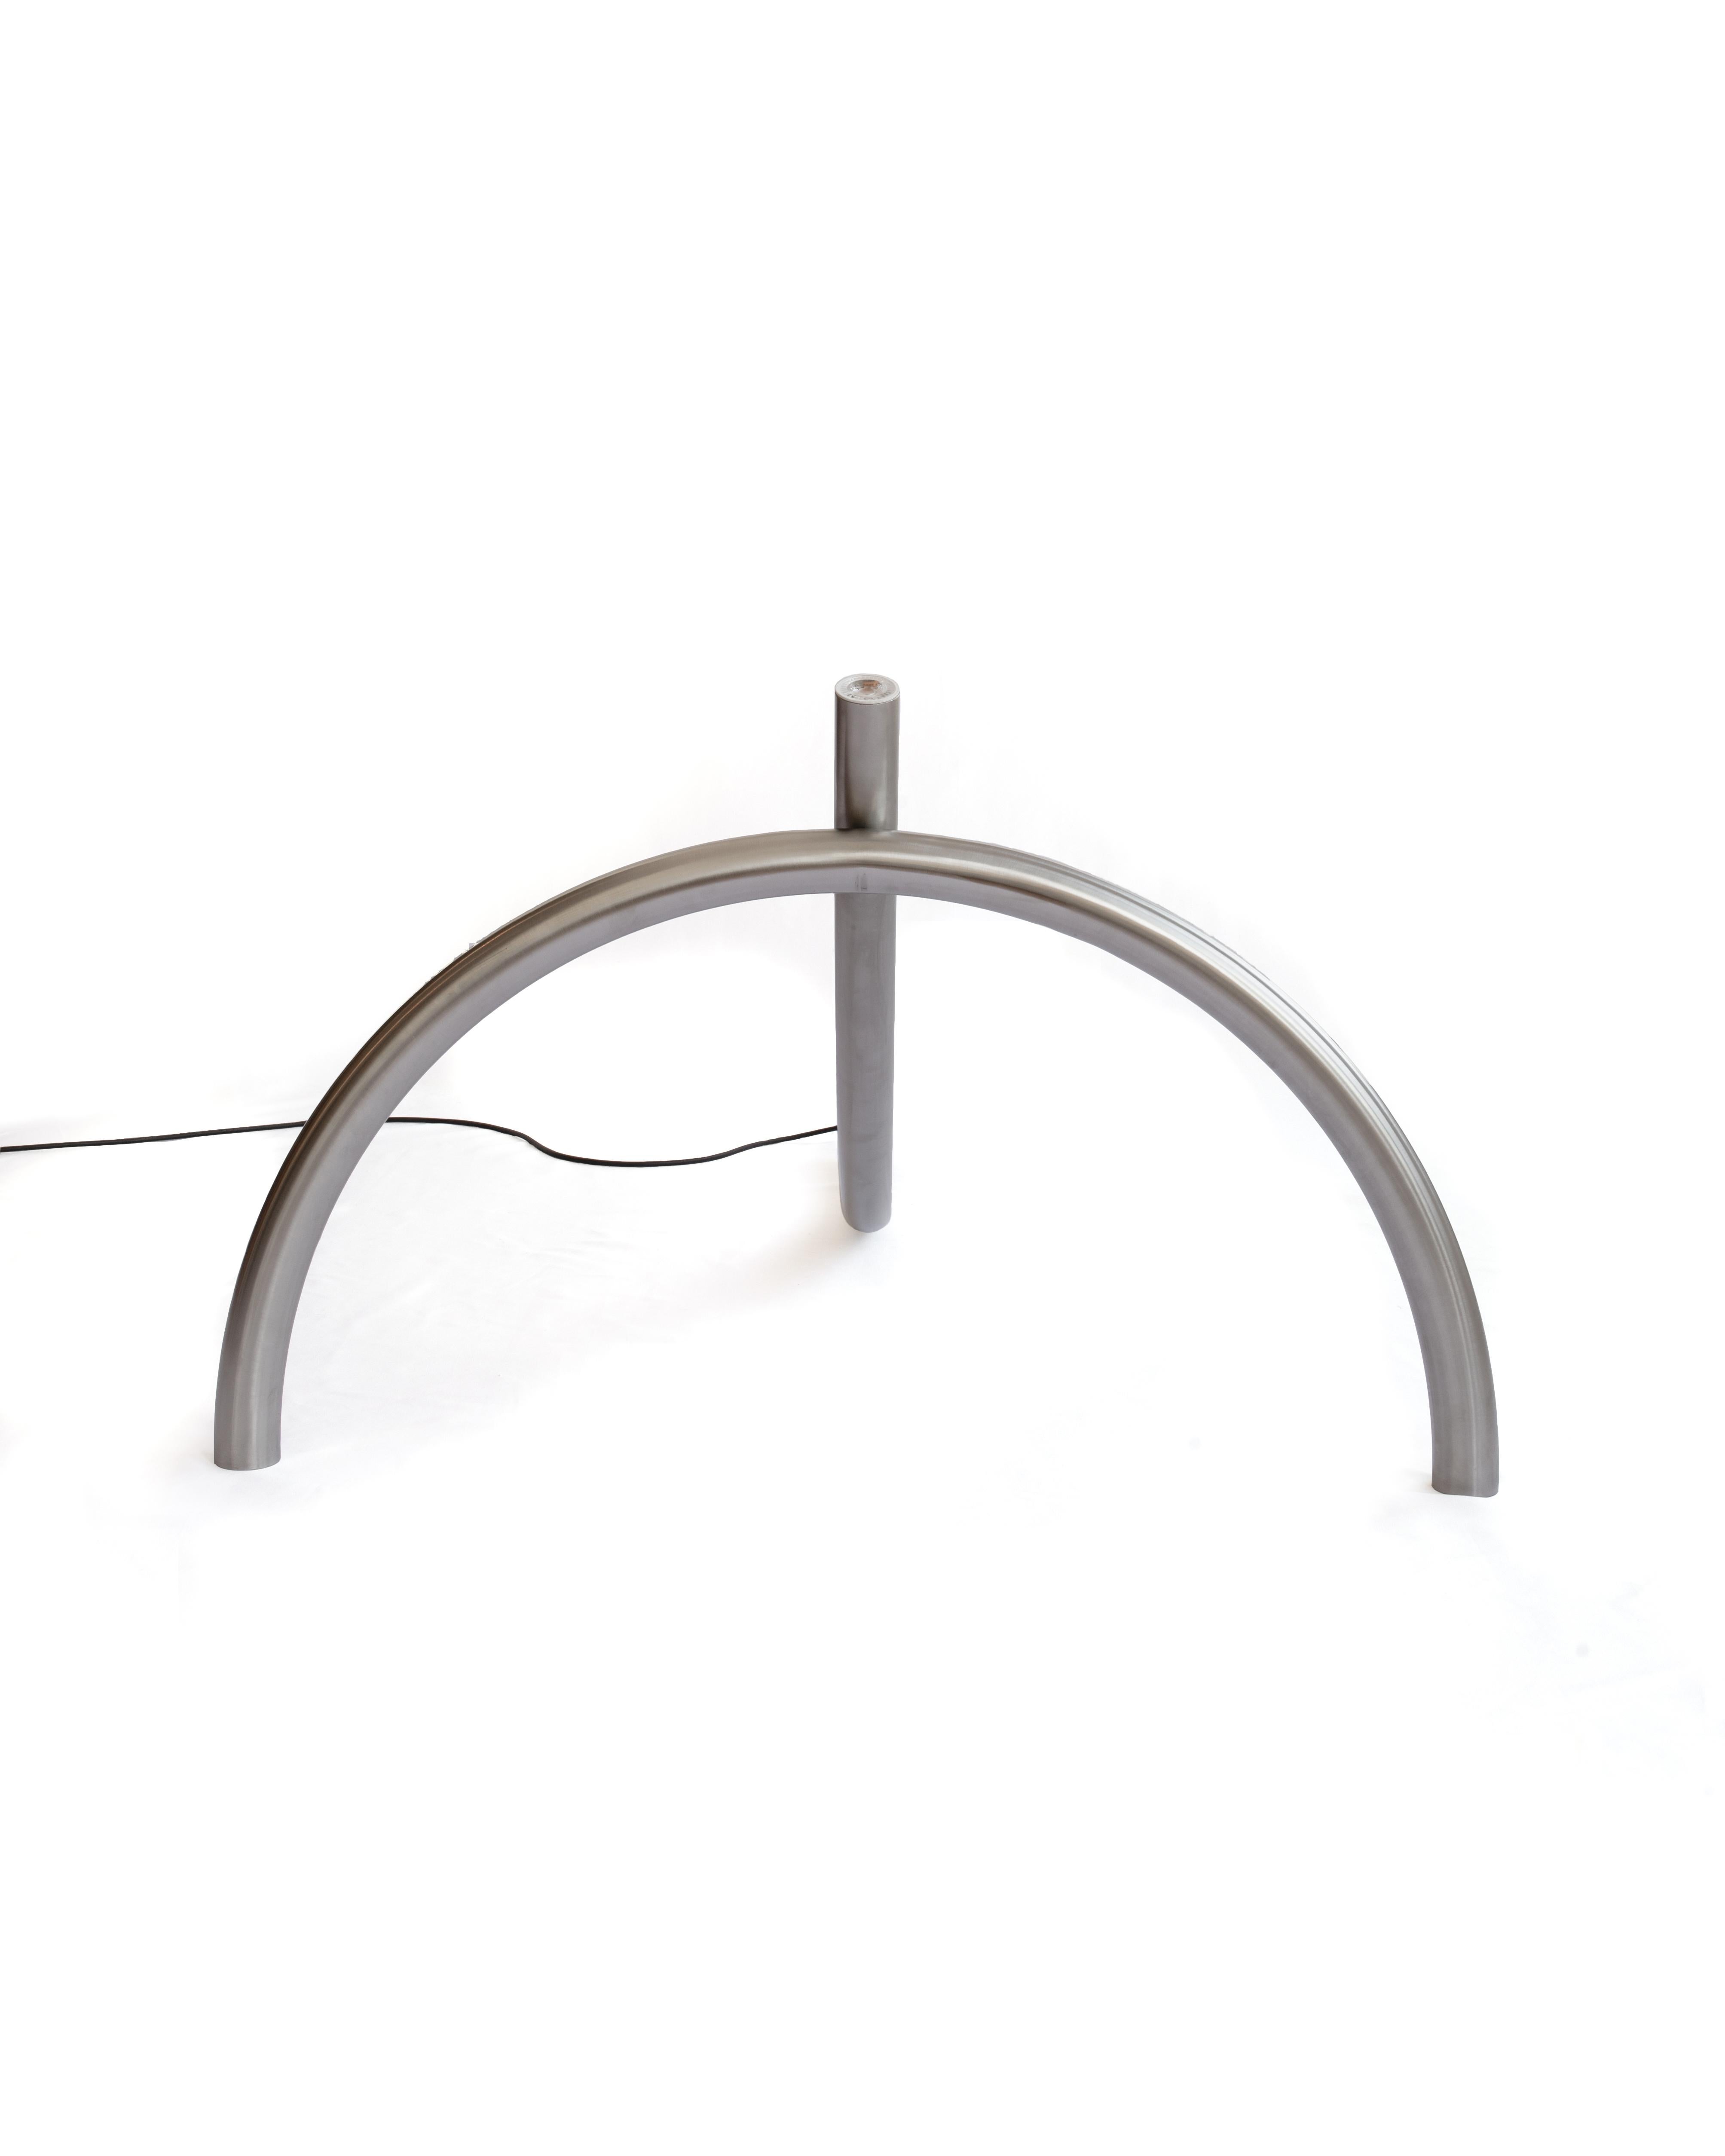 Spanish Tubs i Llums #04 by Max Enrich, Stainless Steel Floor Lamp For Sale